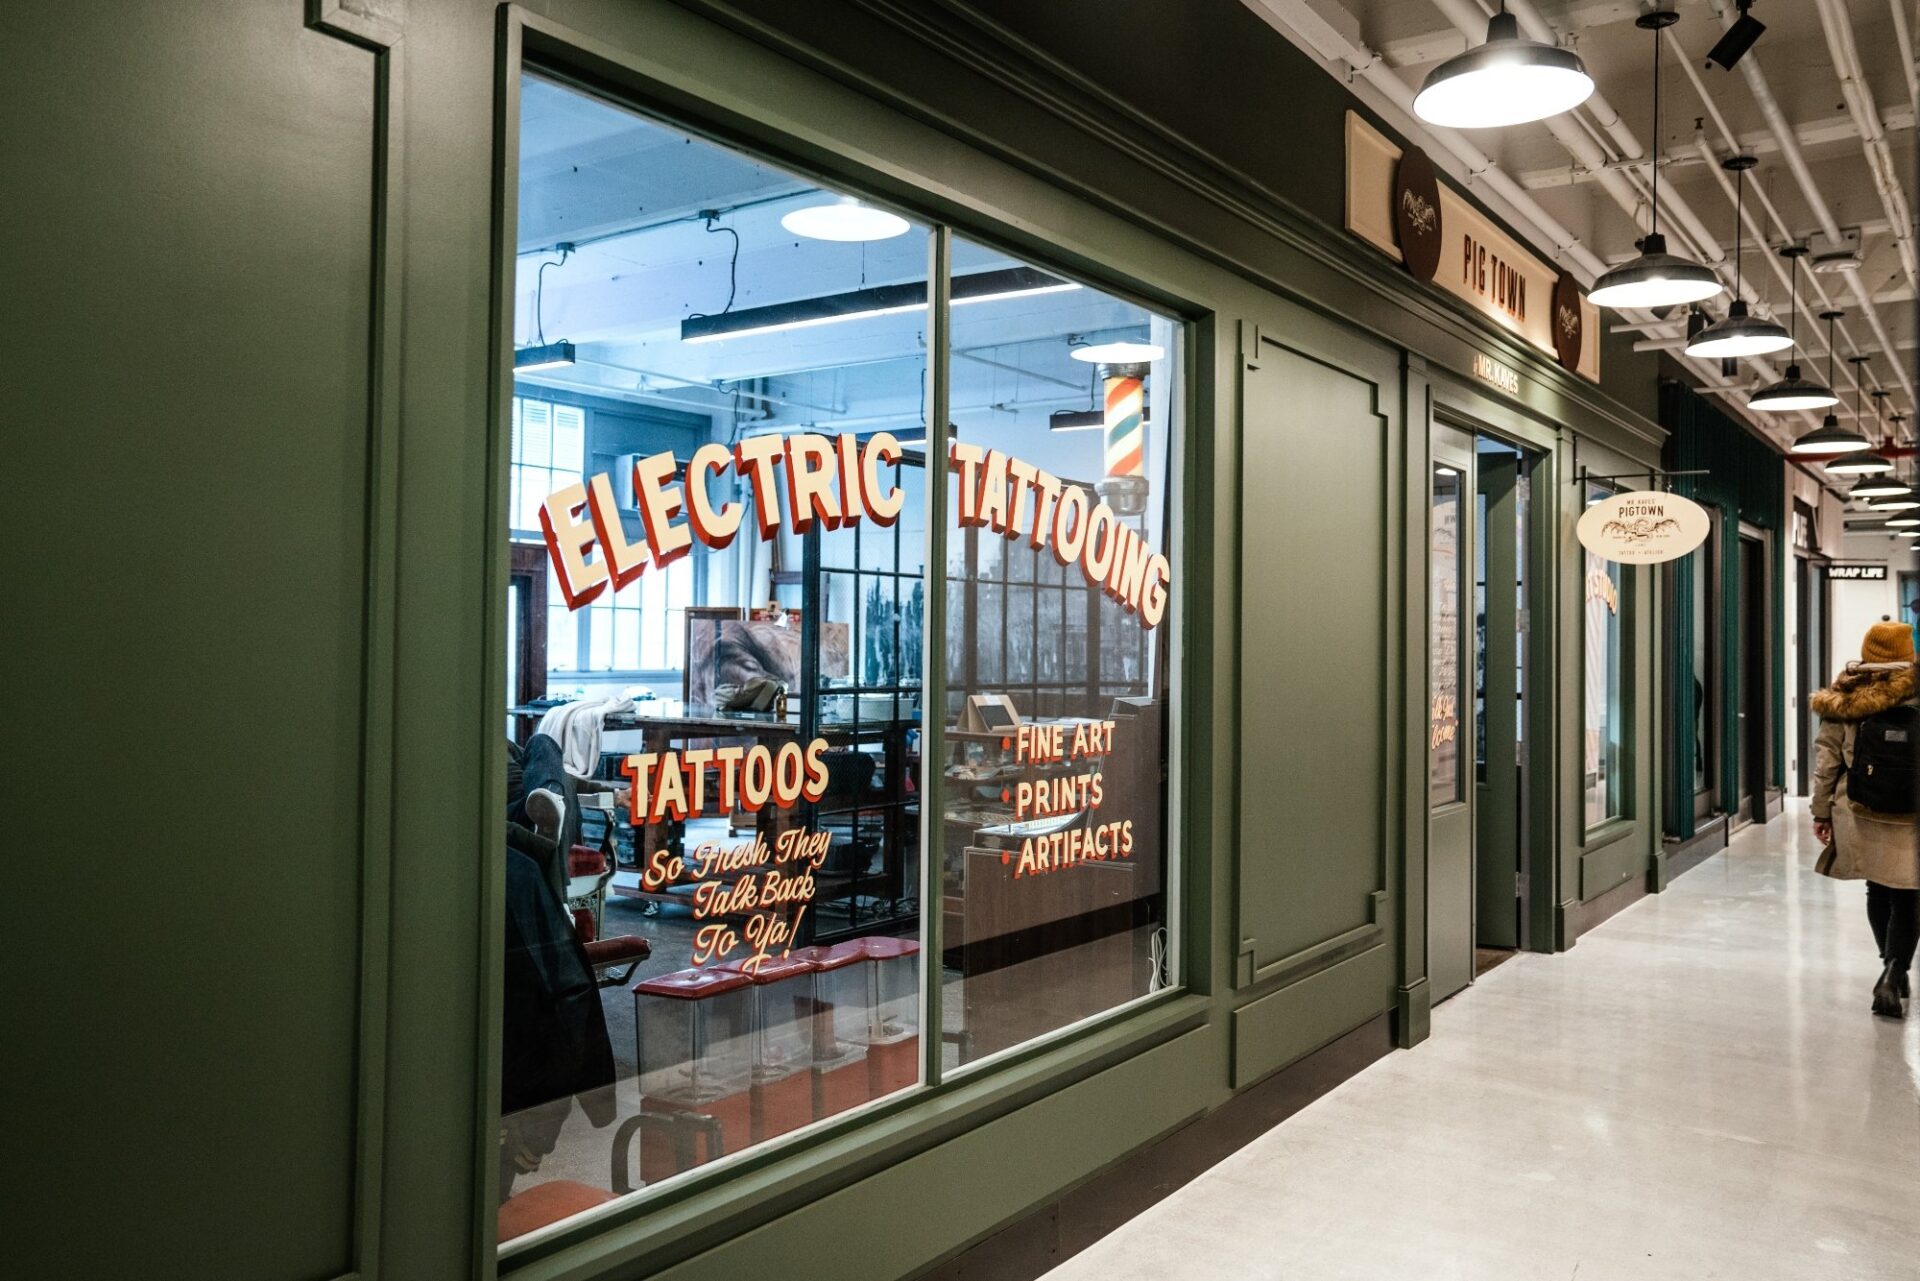 The exterior of a storefront called "Electric Tattoos."